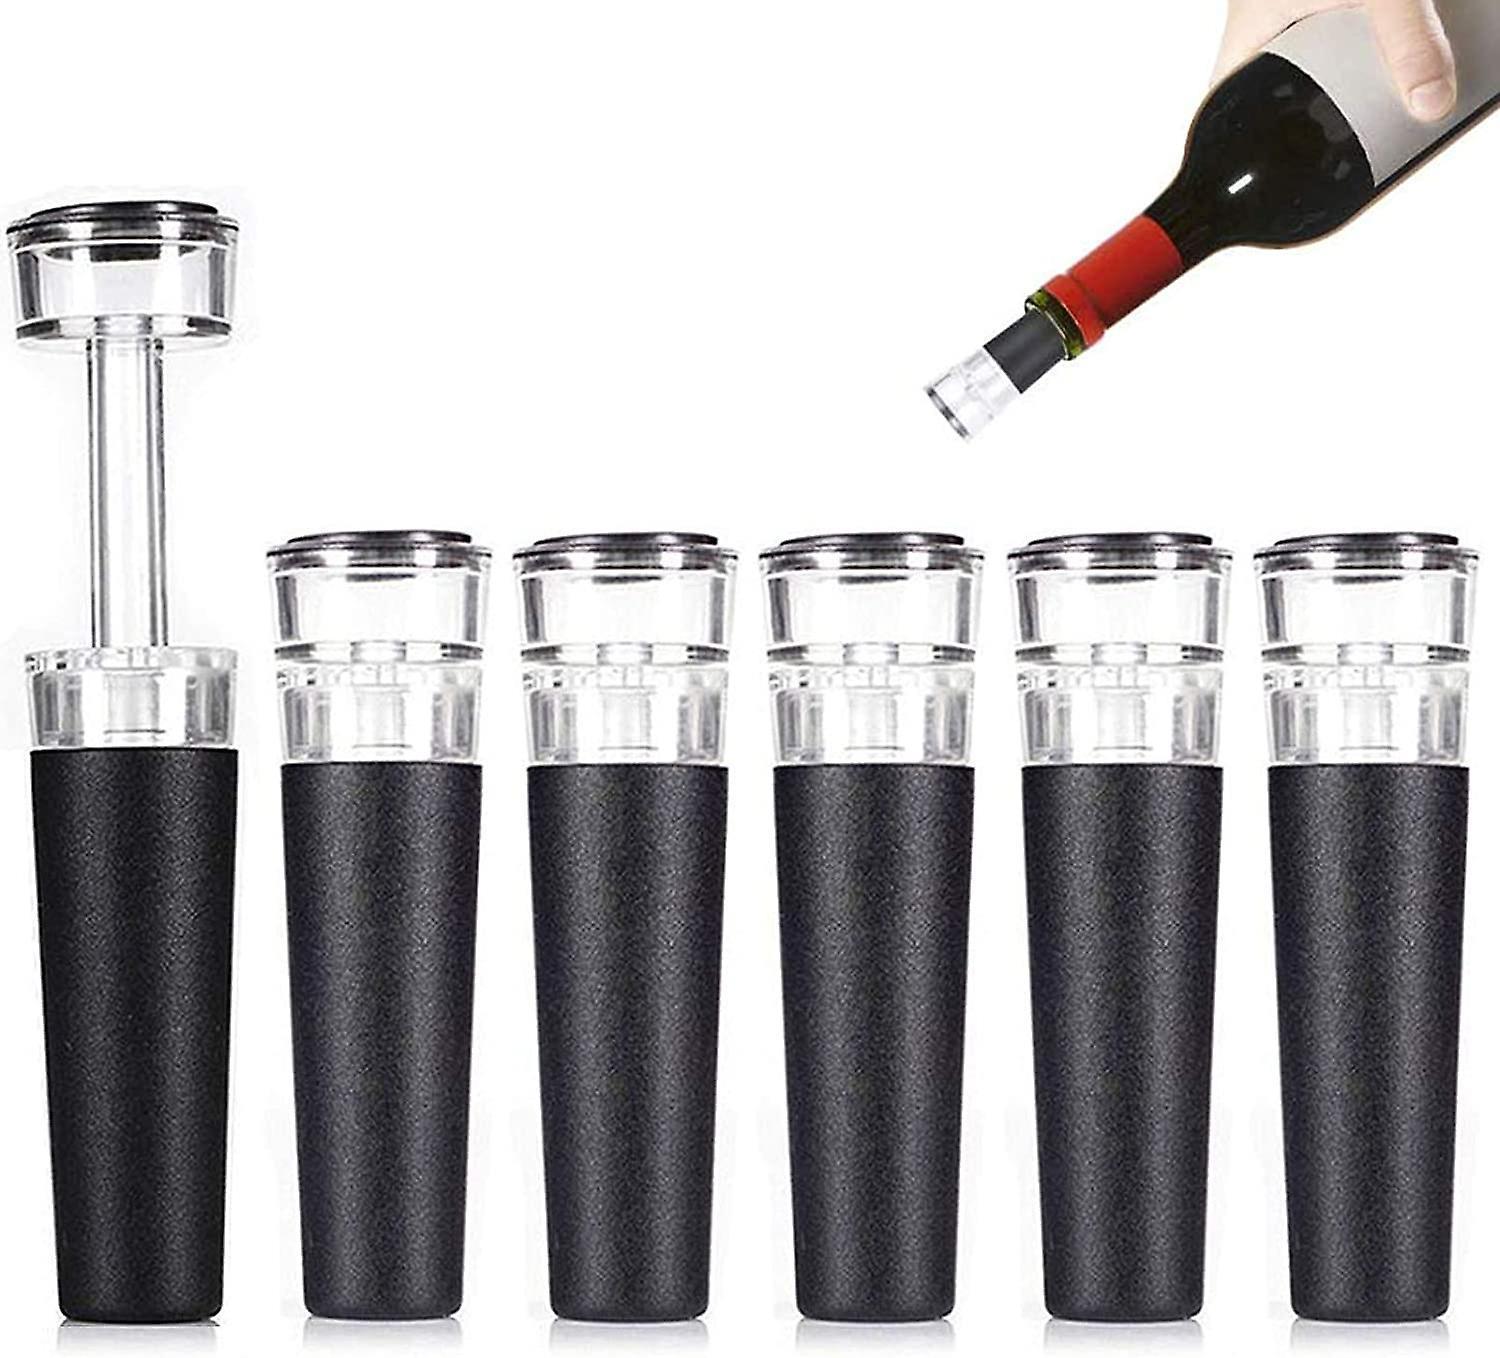 Wine Stoppers, 6 Pack Vacuum Wine Stopper, Reusable Wine Bottle Stoppers With Built-in Vacuum Pump Leakproof Wine Bottle Sealer Silicone Caps, Air Rem